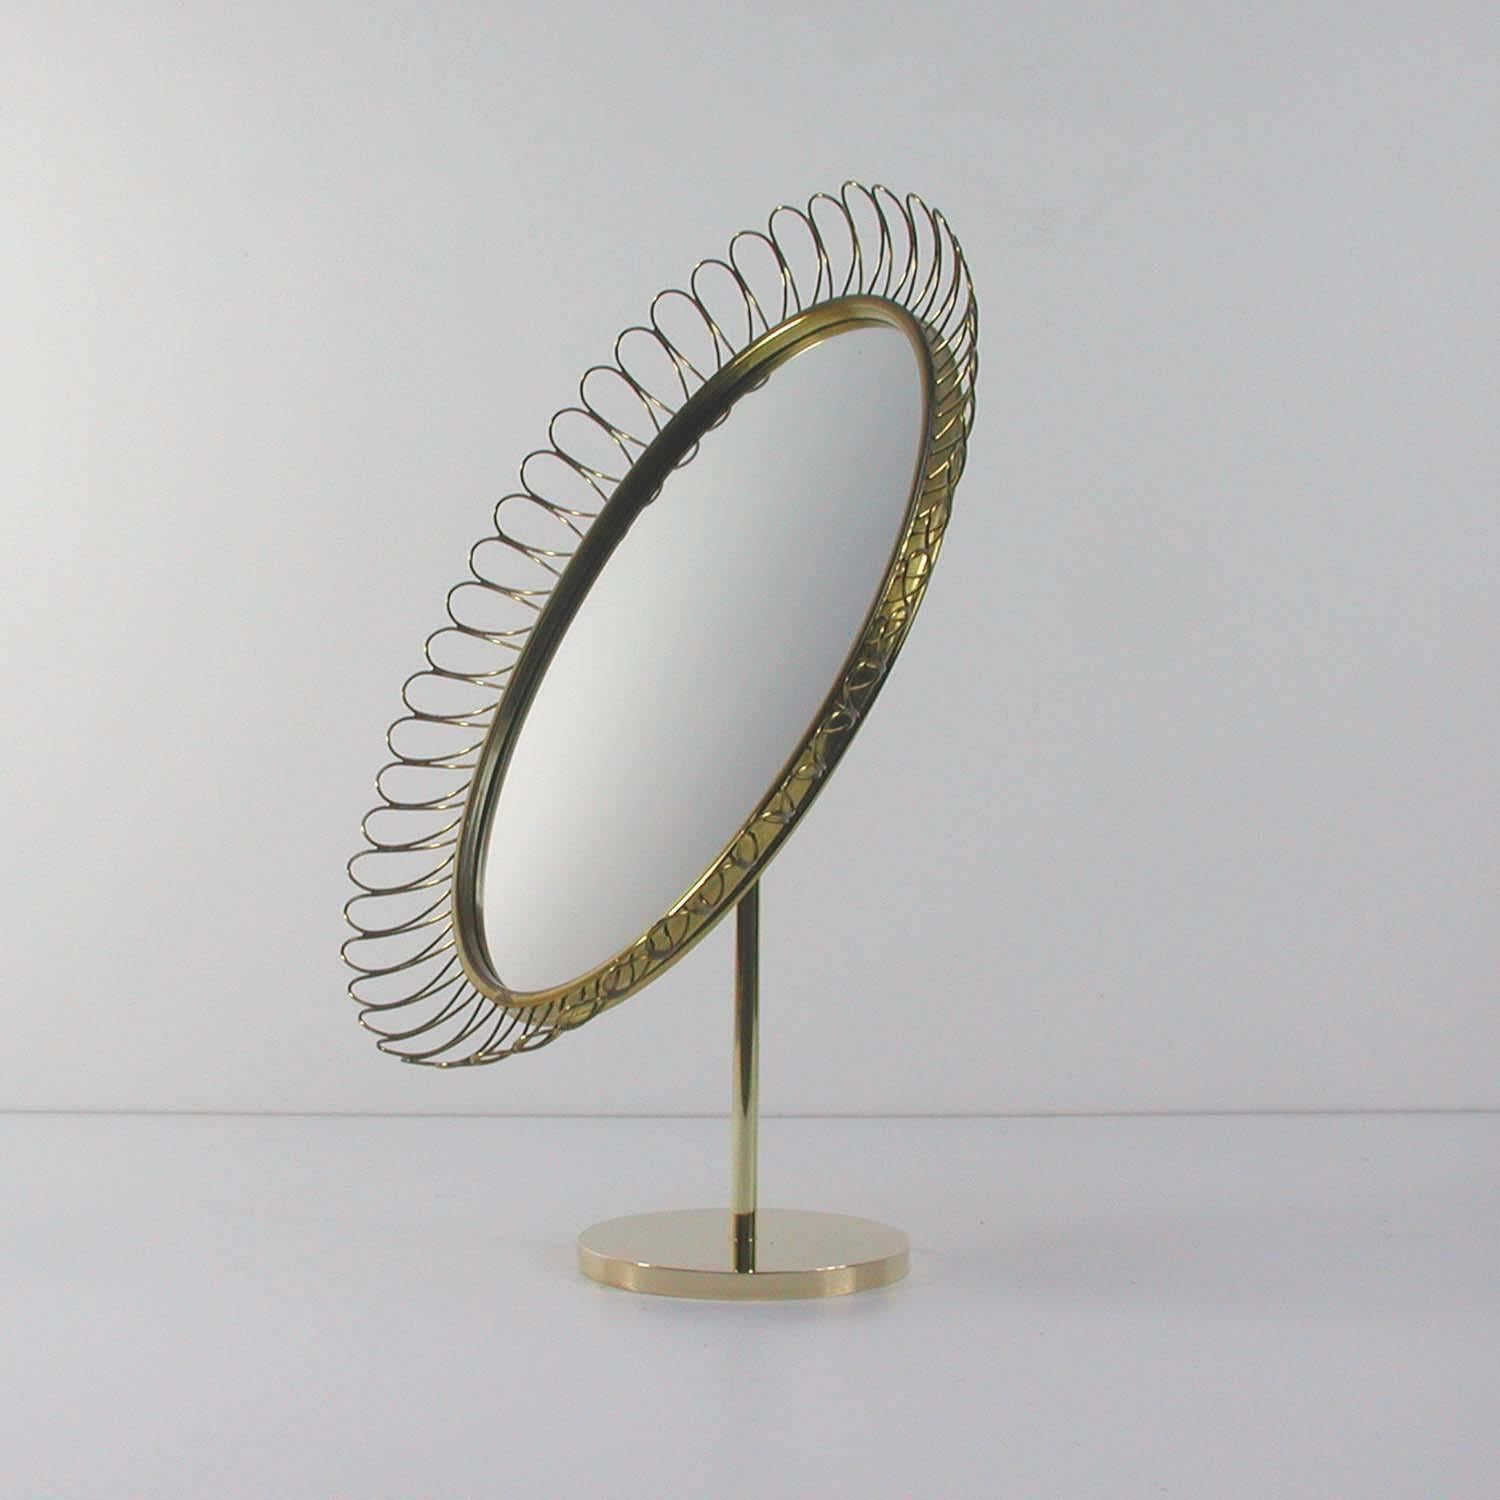 This oval vanity mirror was made in Sweden in the 1950s in the manner of Josef Frank for Svenskt Tenn. It is made of a brass looped frame and has got a solid brass foot. The rear is made of teak veneer. The mirror is adjustable.